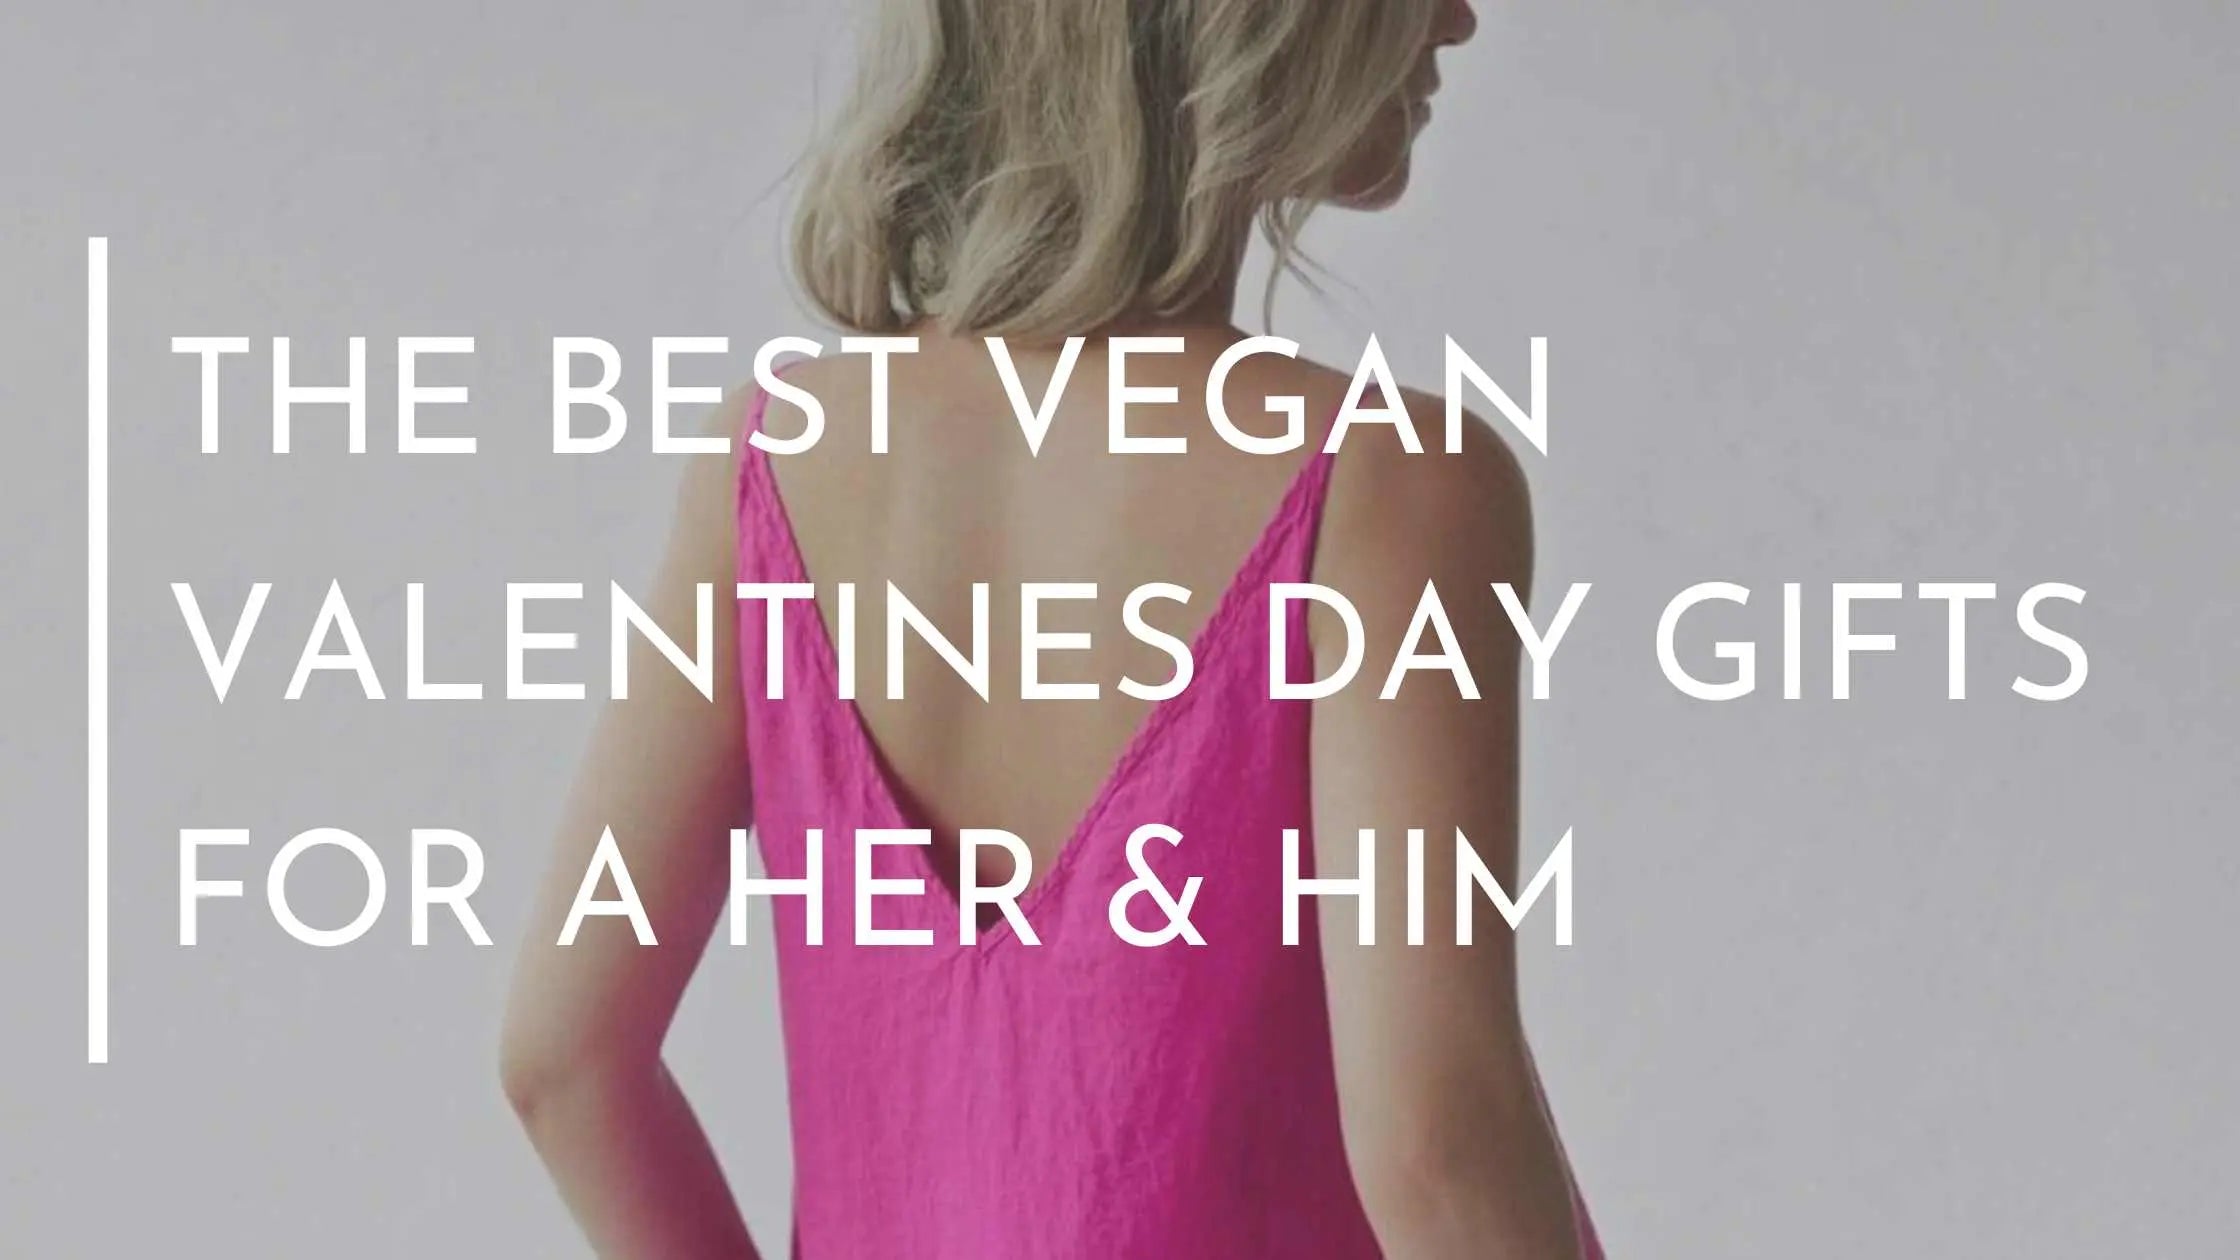 the-best-vegan-valentines-day-gifts-for-her-him